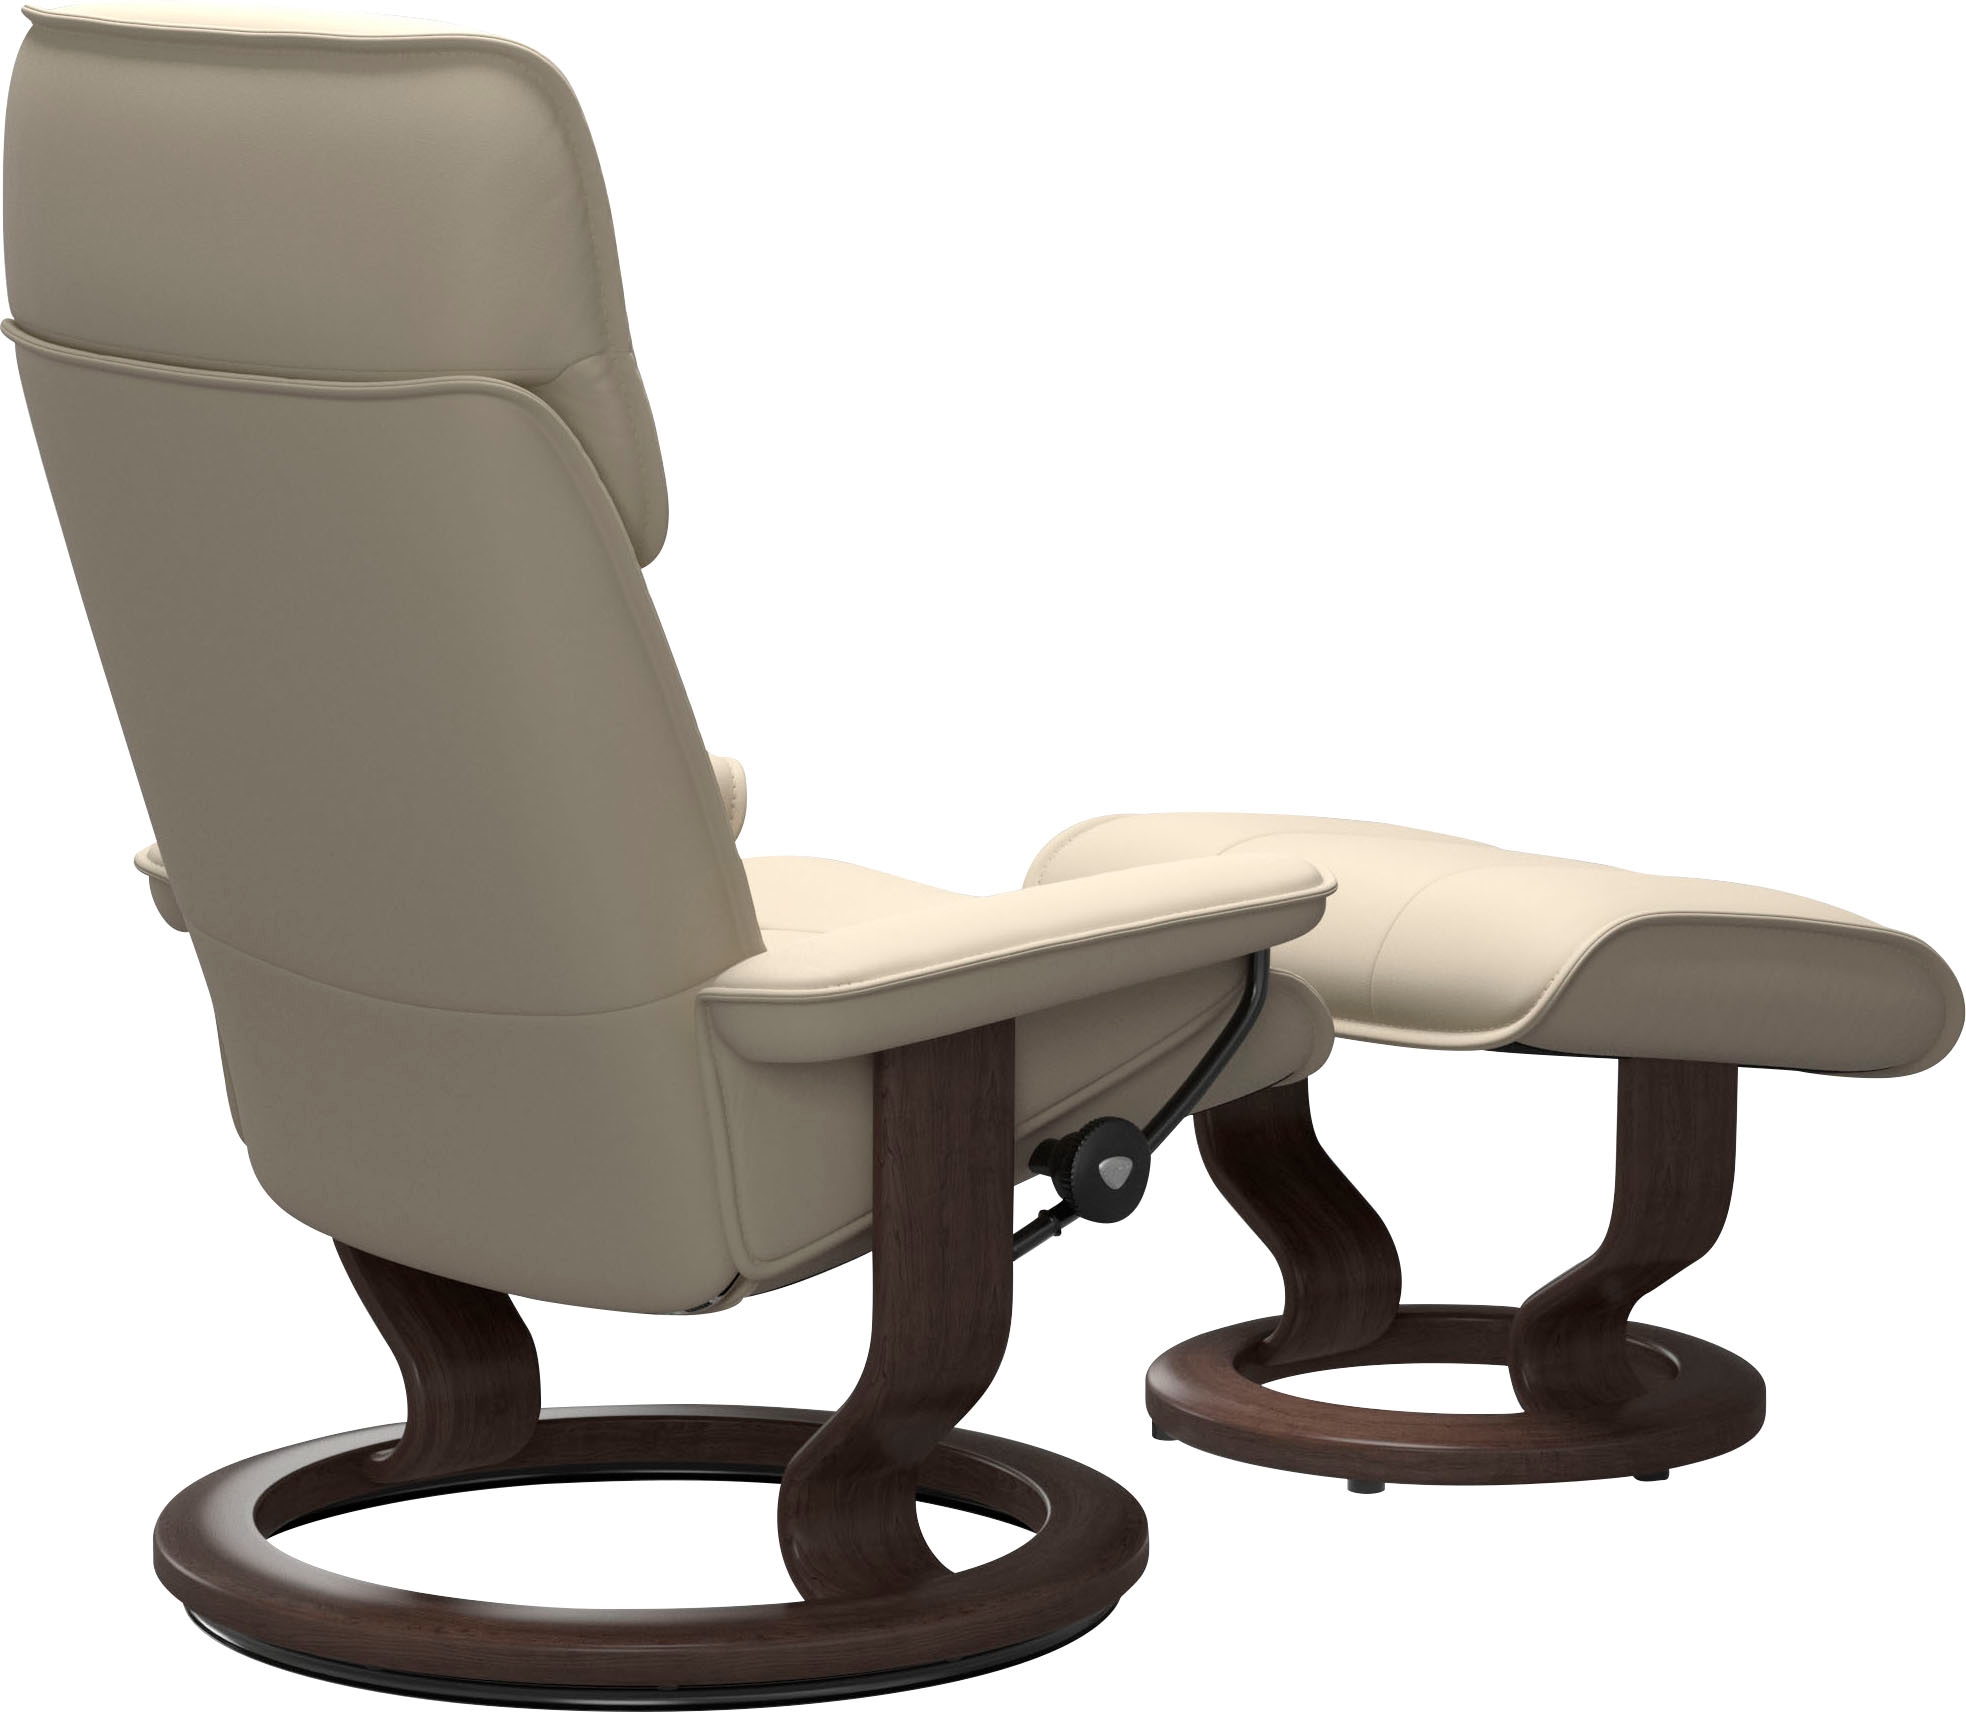 M Base, Classic Stressless® Relaxsessel & Größe mit »Admiral«, Gestell OTTO Online Relaxsessel L, Wenge Shop inkl. Hocker), (Set,